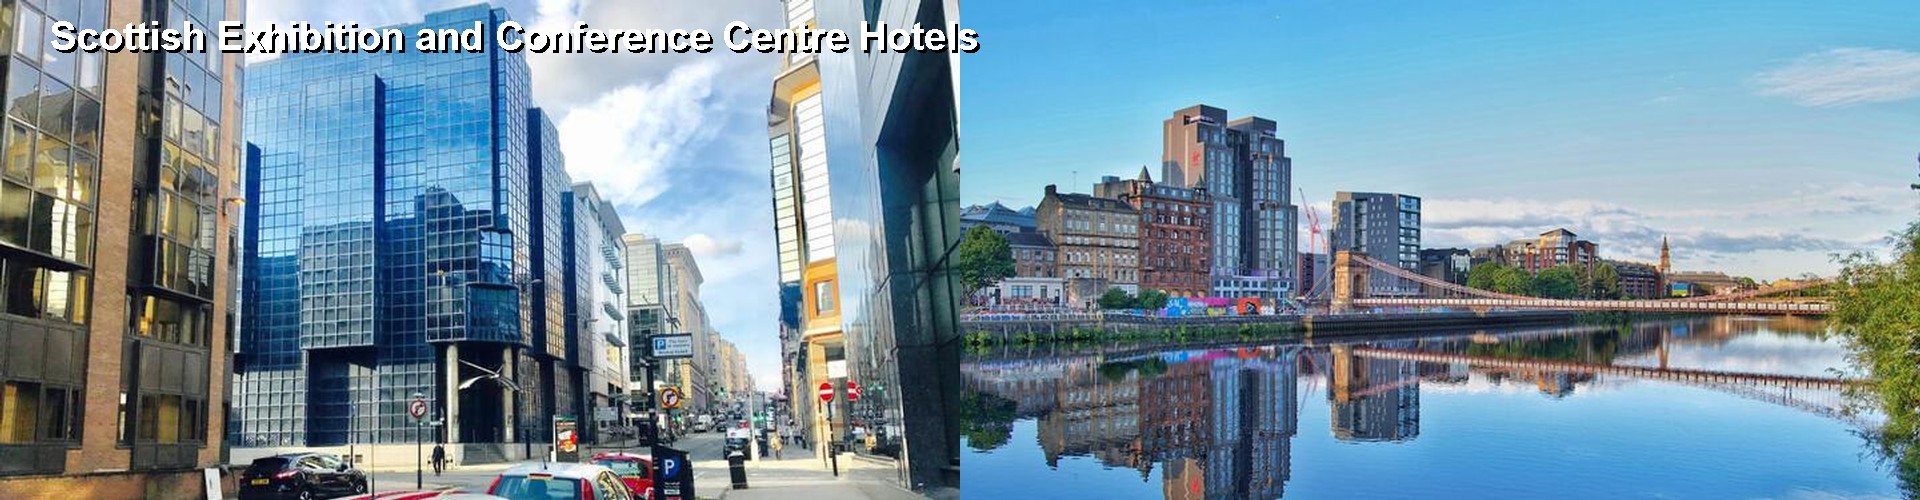 5 Best Hotels near Scottish Exhibition and Conference Centre